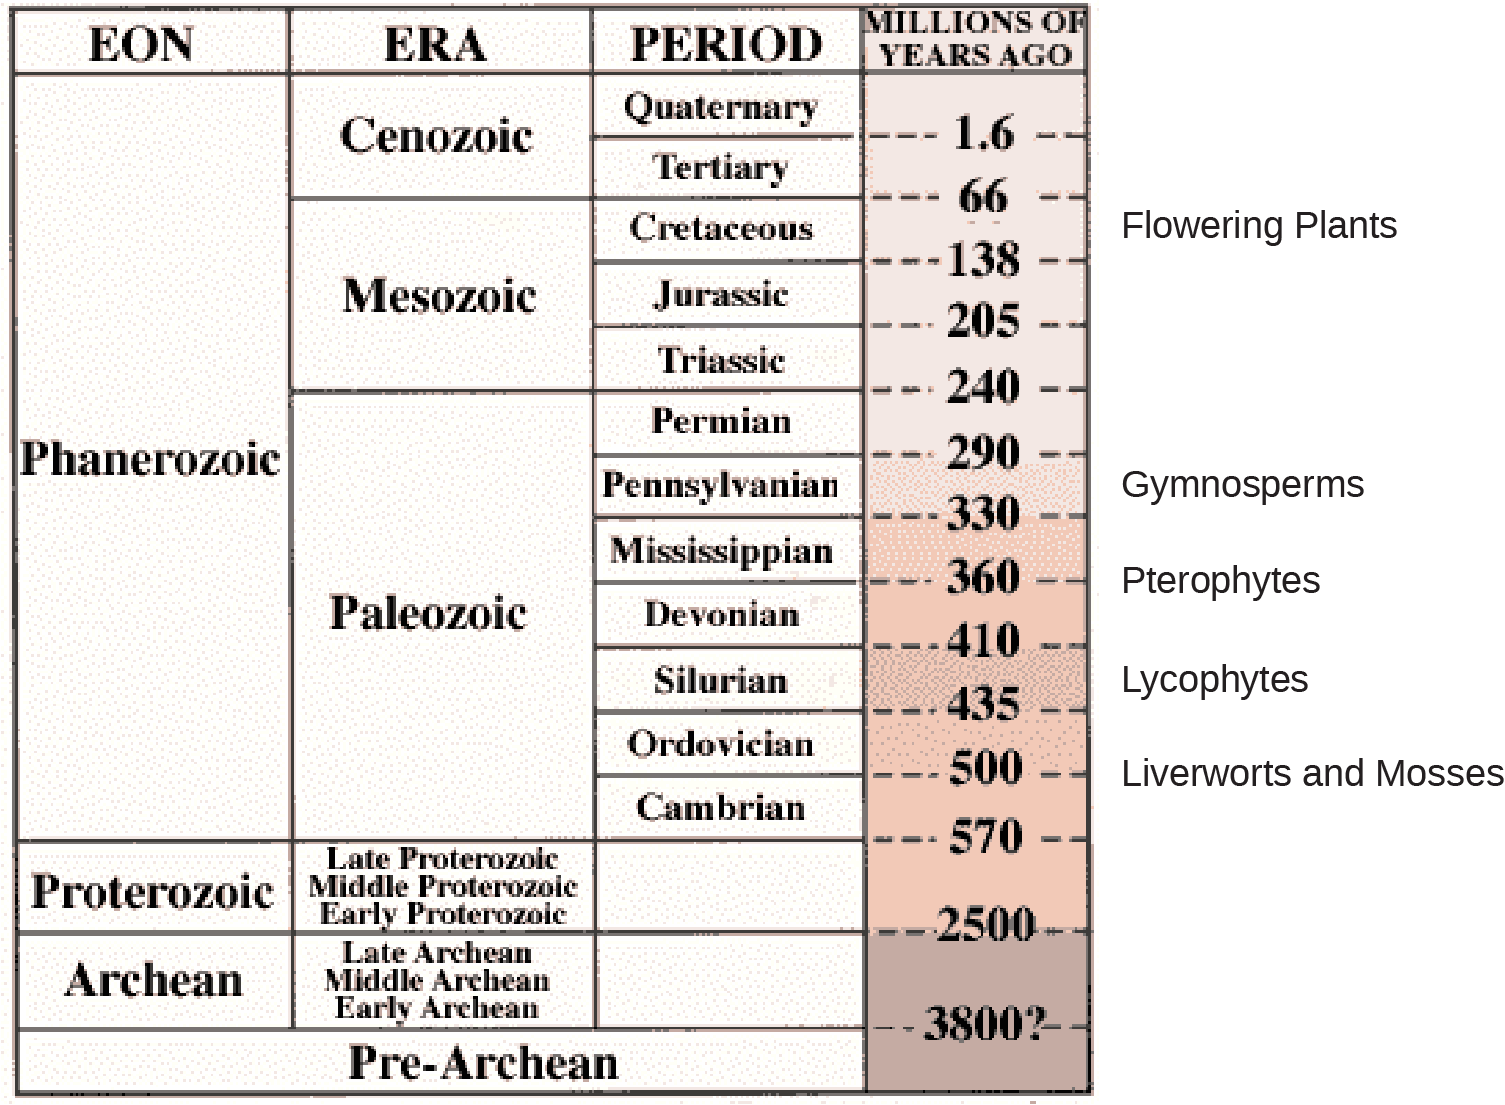 Image is of a table showing a timeline of geological eons and eras. PreArchaen eon. occurs more than 3.8 billion years ago. Archean eon. occurs more than 2.5 billion years ago. Proterzoic eon occurs between 570 million and 2.5 billion years ago. The most recent eon, the Phanerozoic began 570 million years ago. Within it, the liverworts and mosses appeared about 500 million years ago, at the end of the Cambrian period in the Paleozoic era. Ther lycophytes developed about 400 million years ago during the silurian period.  Pterophytes about 360 million years ago at the start of the Mississippian period. Gymnosperms about 290 million years ago during the Pennsylvanian period. All of these remained in the Paleozoic era. In the subequent era, the Mezozoic, Flowering Plants appeared about 70 million years ago during the Cretacious period.